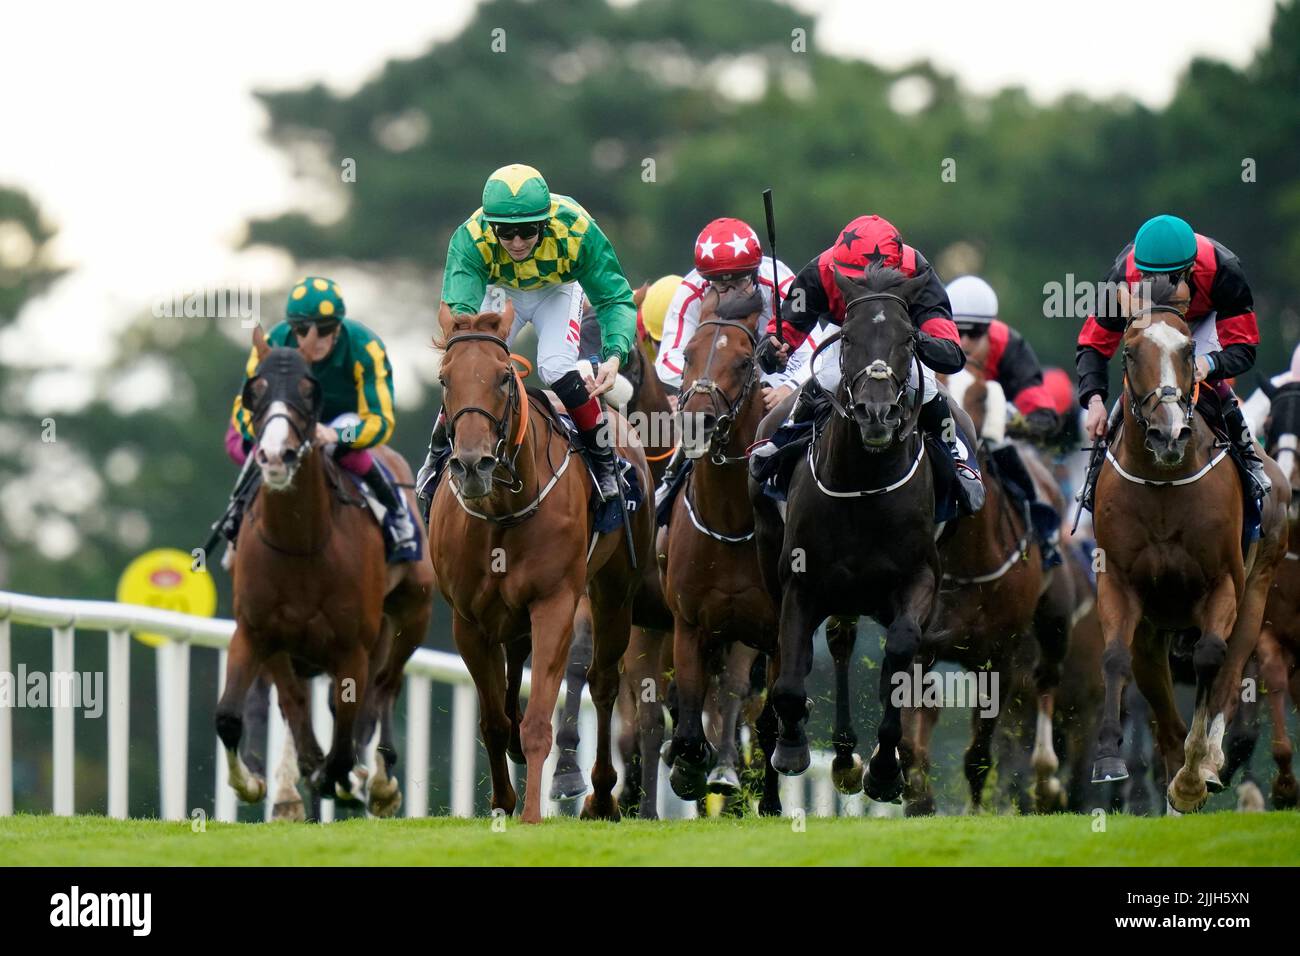 Magic Chegaga ridden by Colin Keane wins the fourth race during day two of the Galway Races Summer Festival 2022 at Galway Racecourse in County Galway, Ireland. Picture date: Tuesday July 26, 2022. Stock Photo